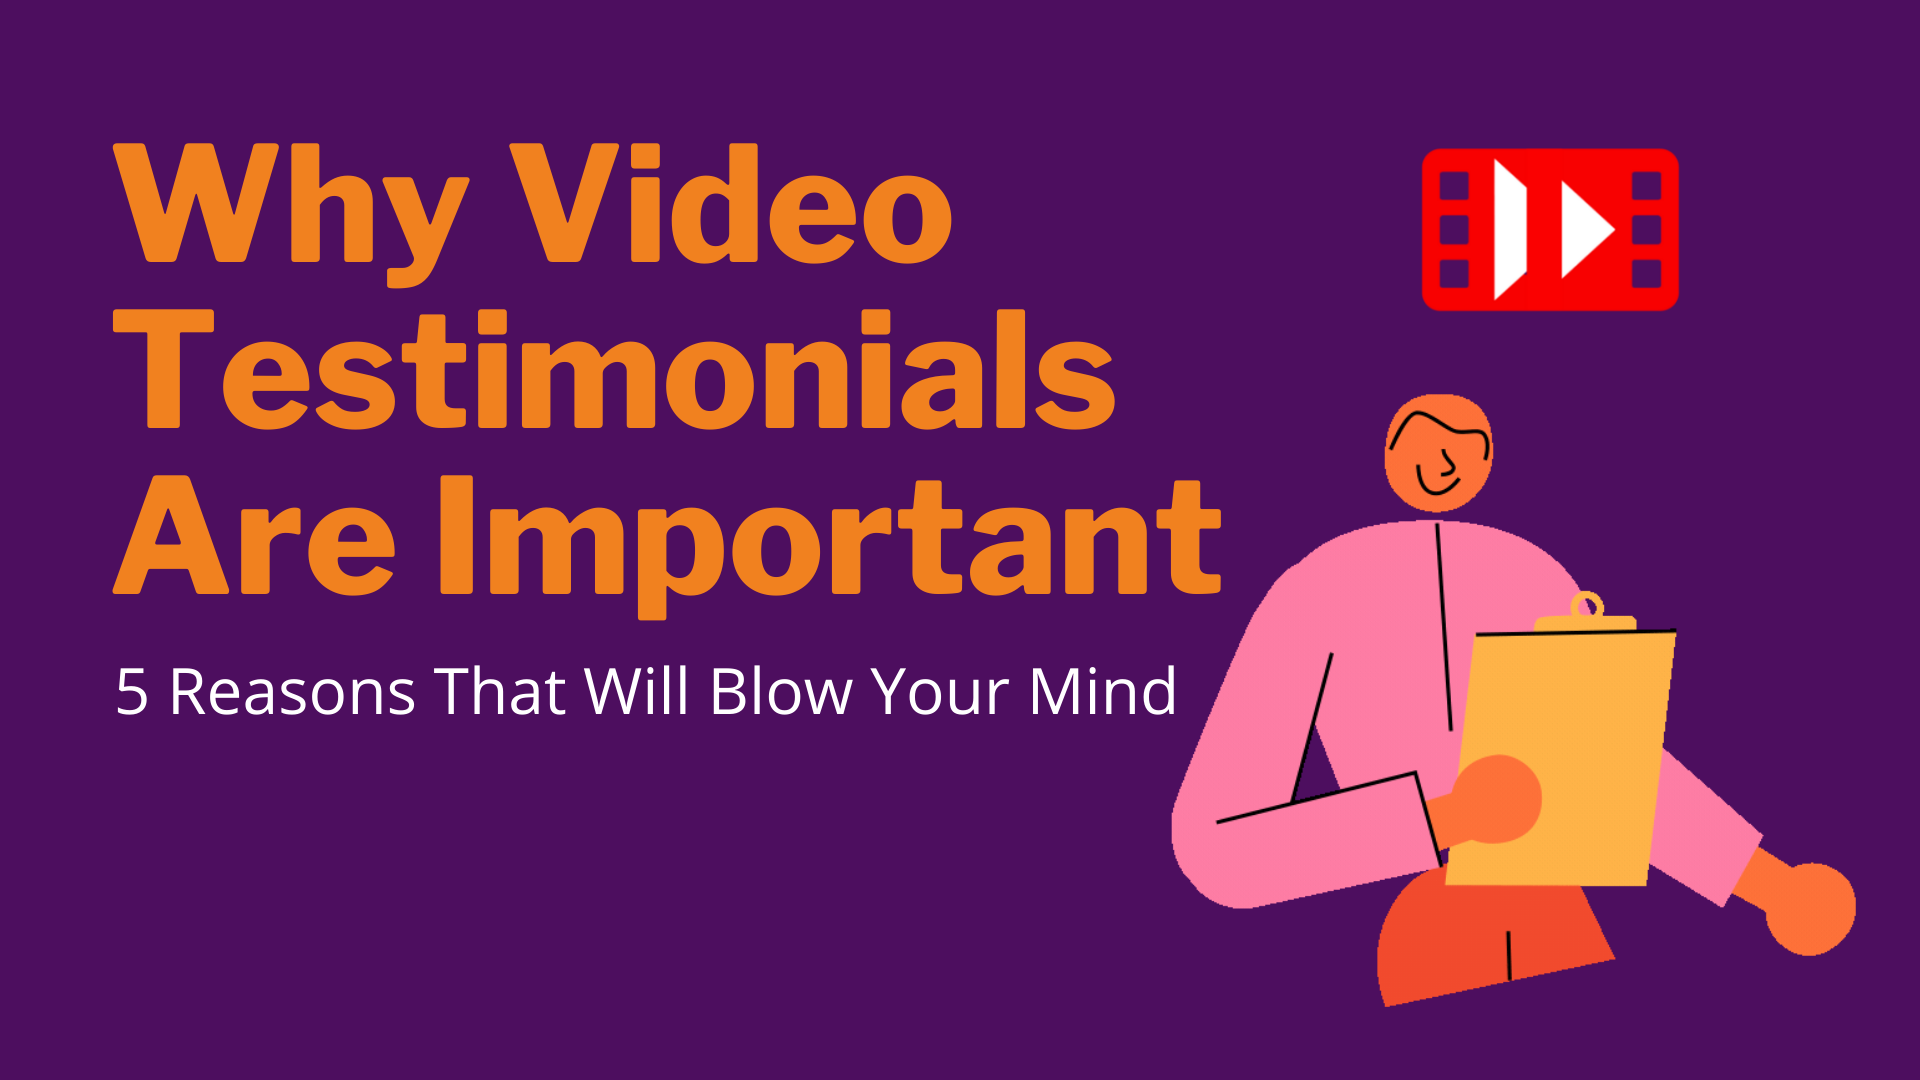 Real Reason Why Video Testimonials Are Important